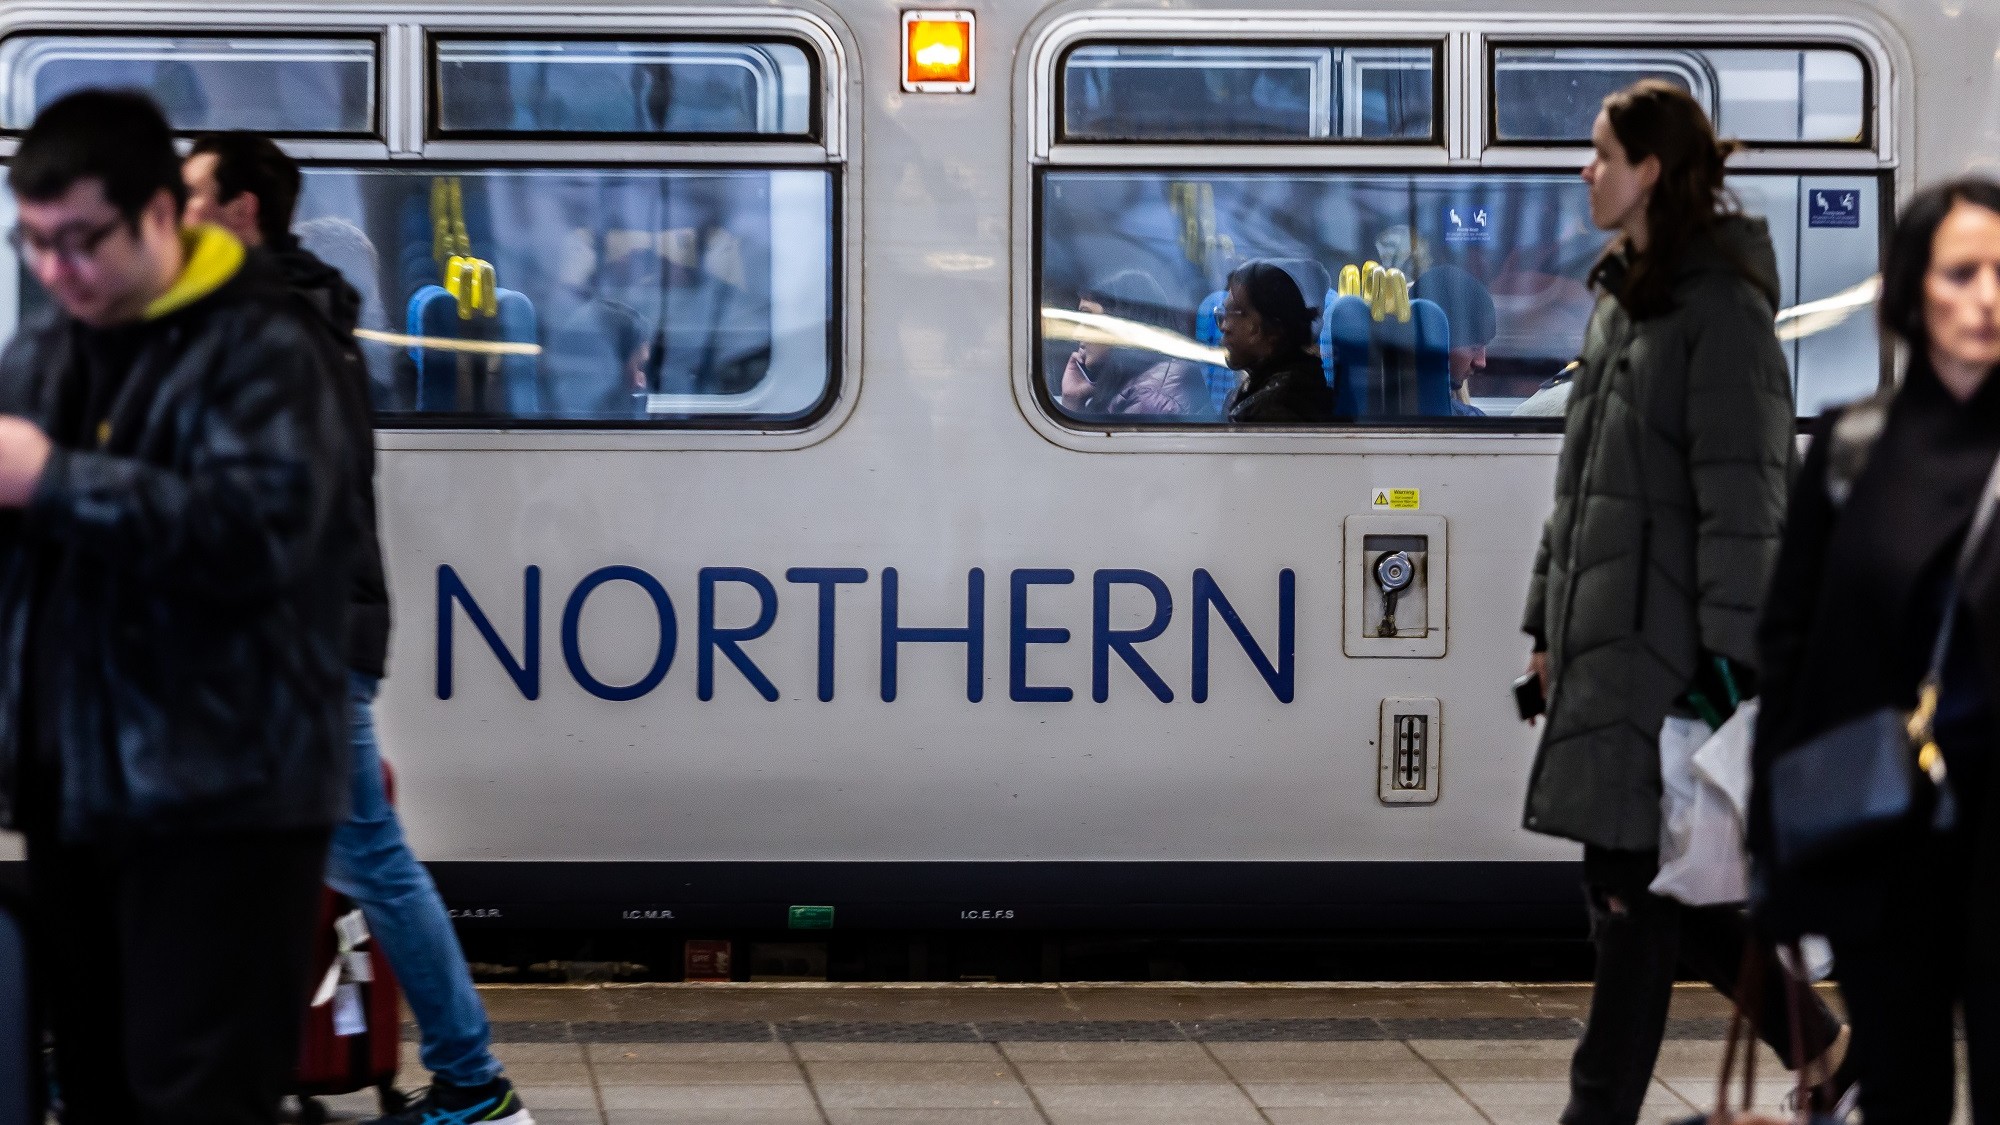 Image shows Northern service with customers on-aboard